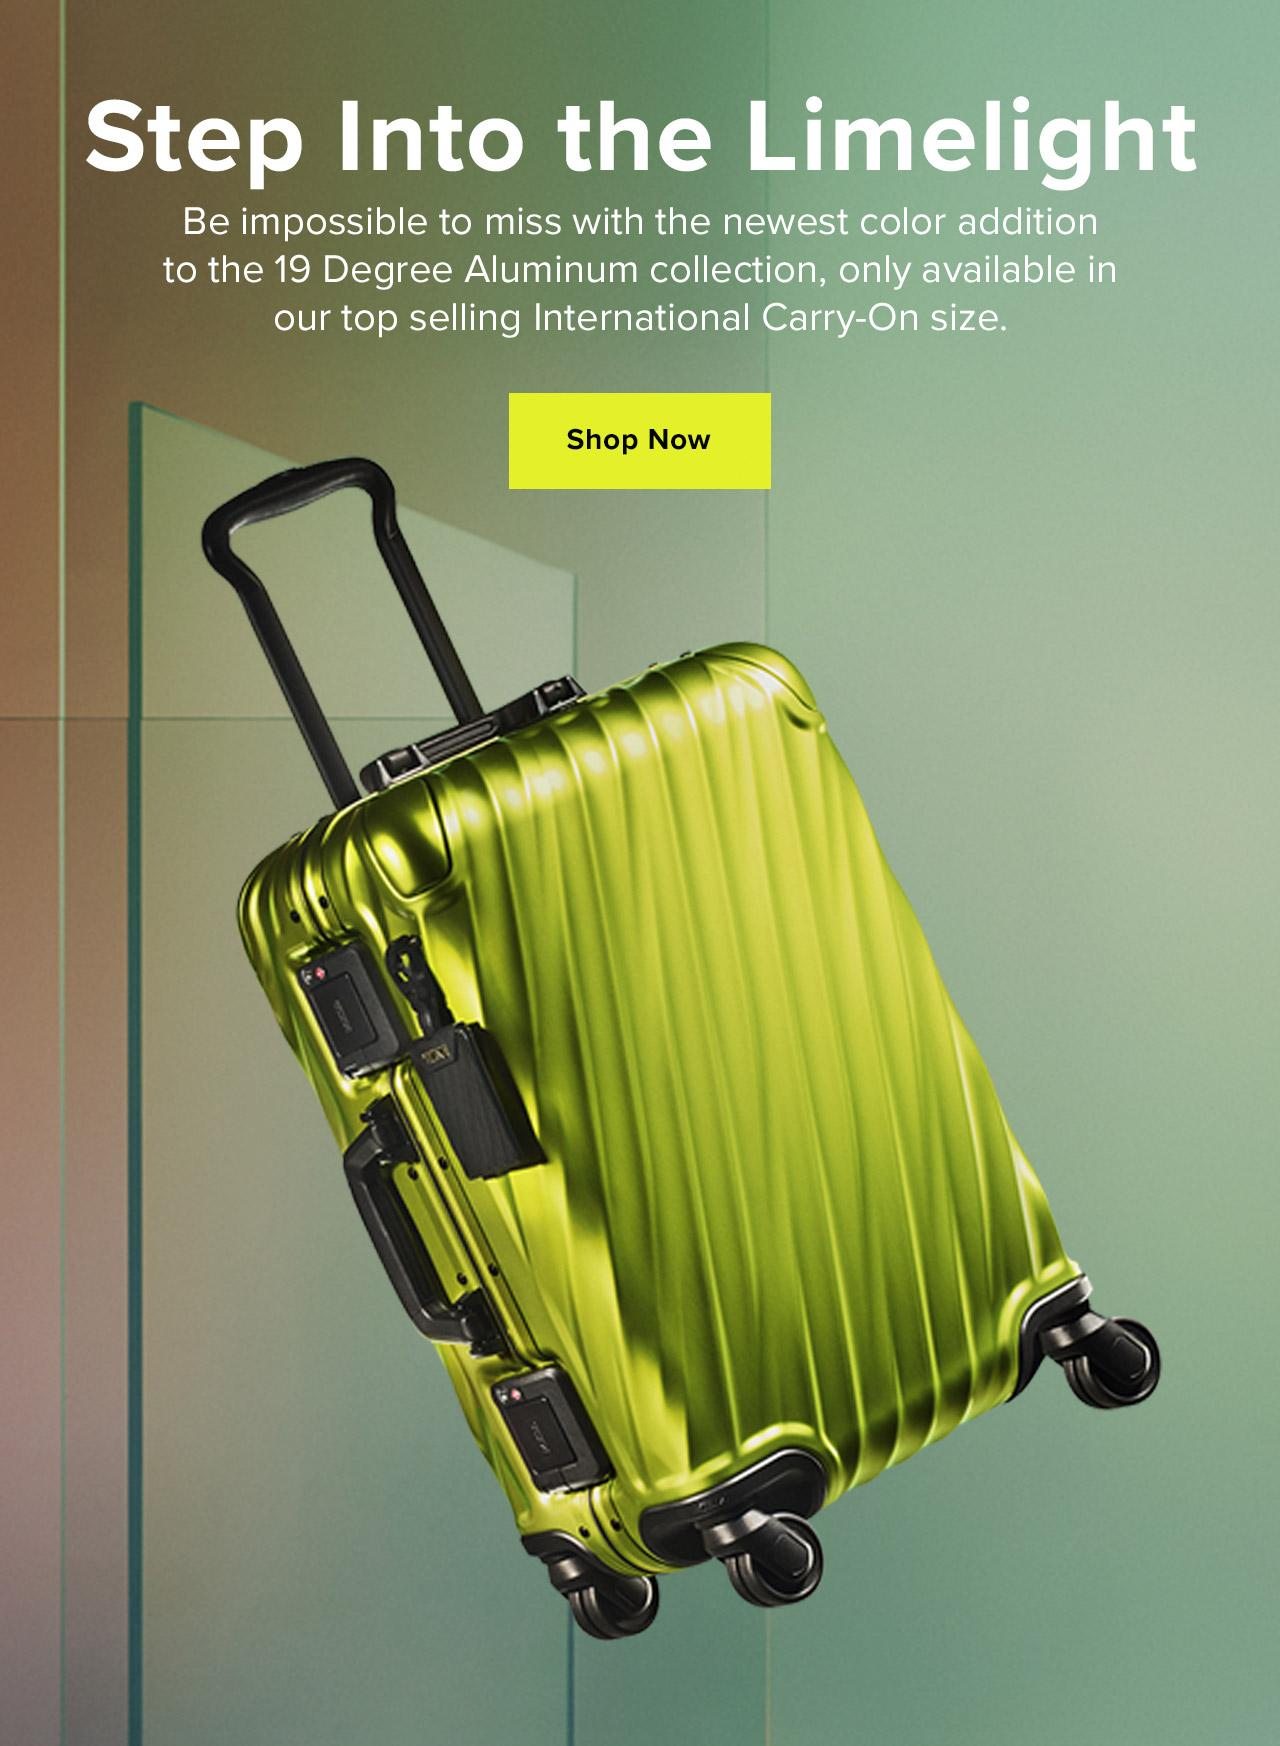 Step Into the Limelight. Be impossible to miss with the newest color addition to the 19 Degree Aluminum collection, only available in our top sellling International Carry-On size. Shop Now